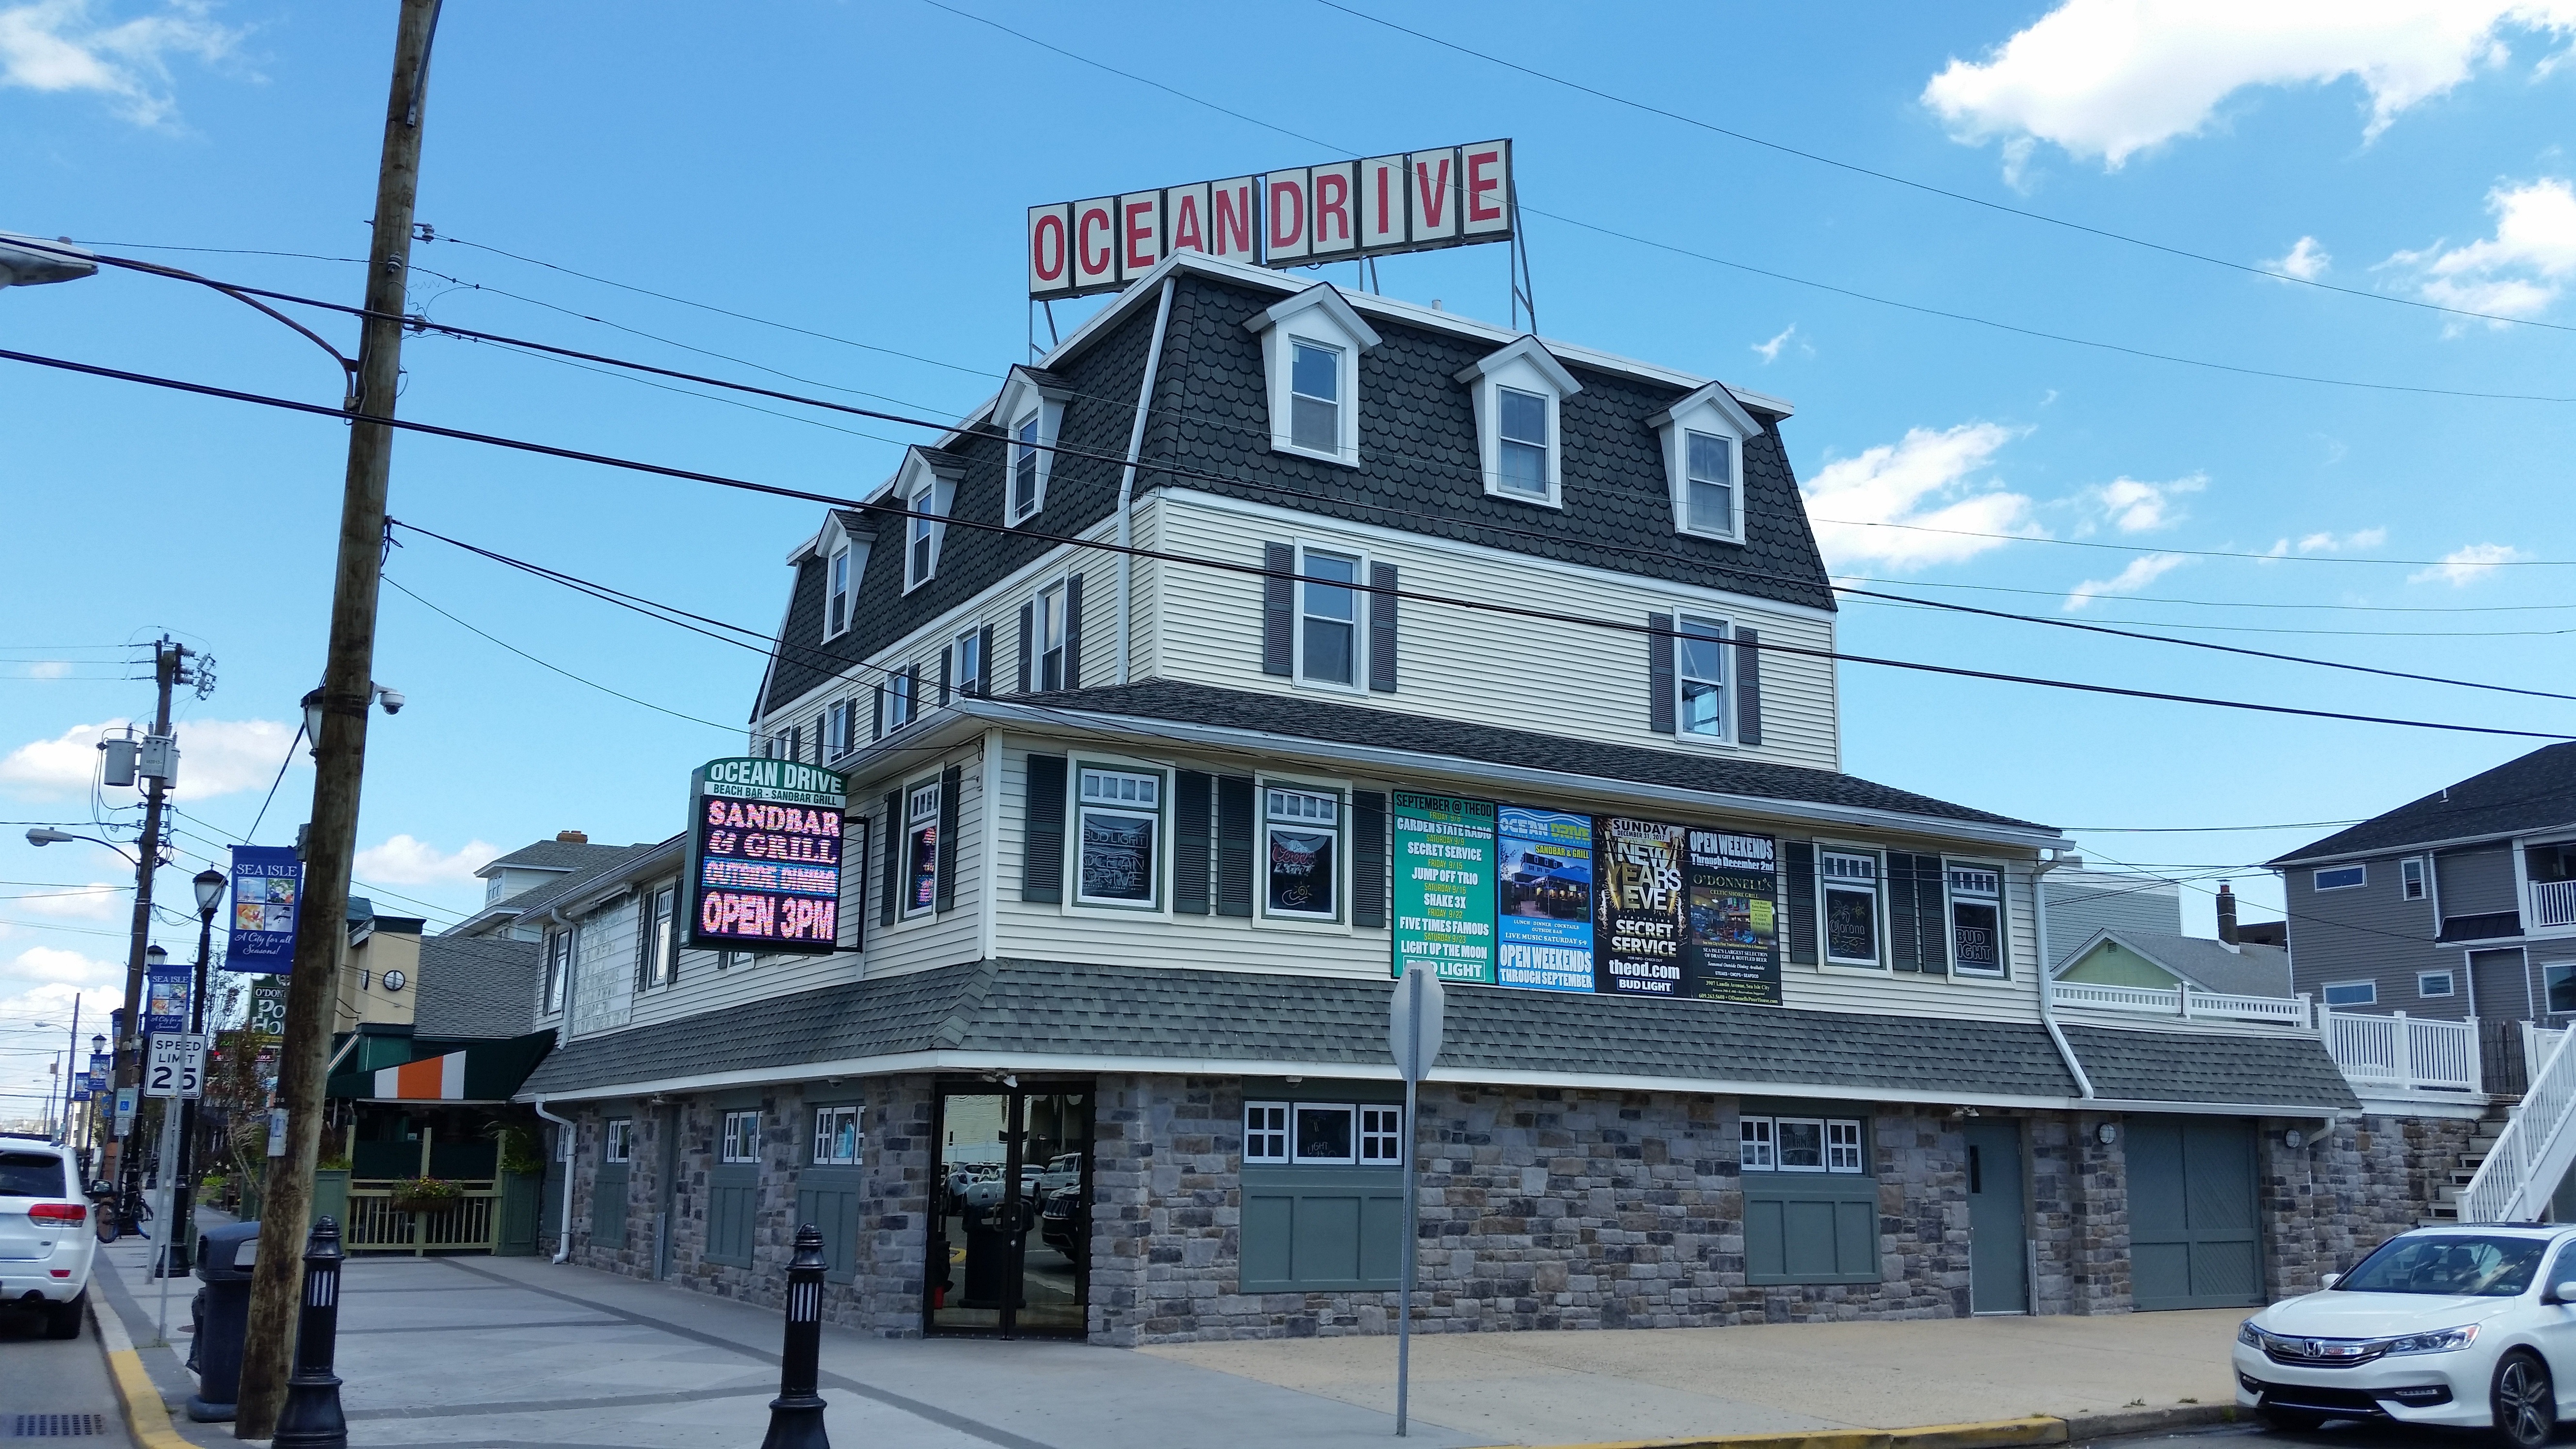 Sea Isle's Iconic Ocean Drive Bar as Strong as Ever Sea